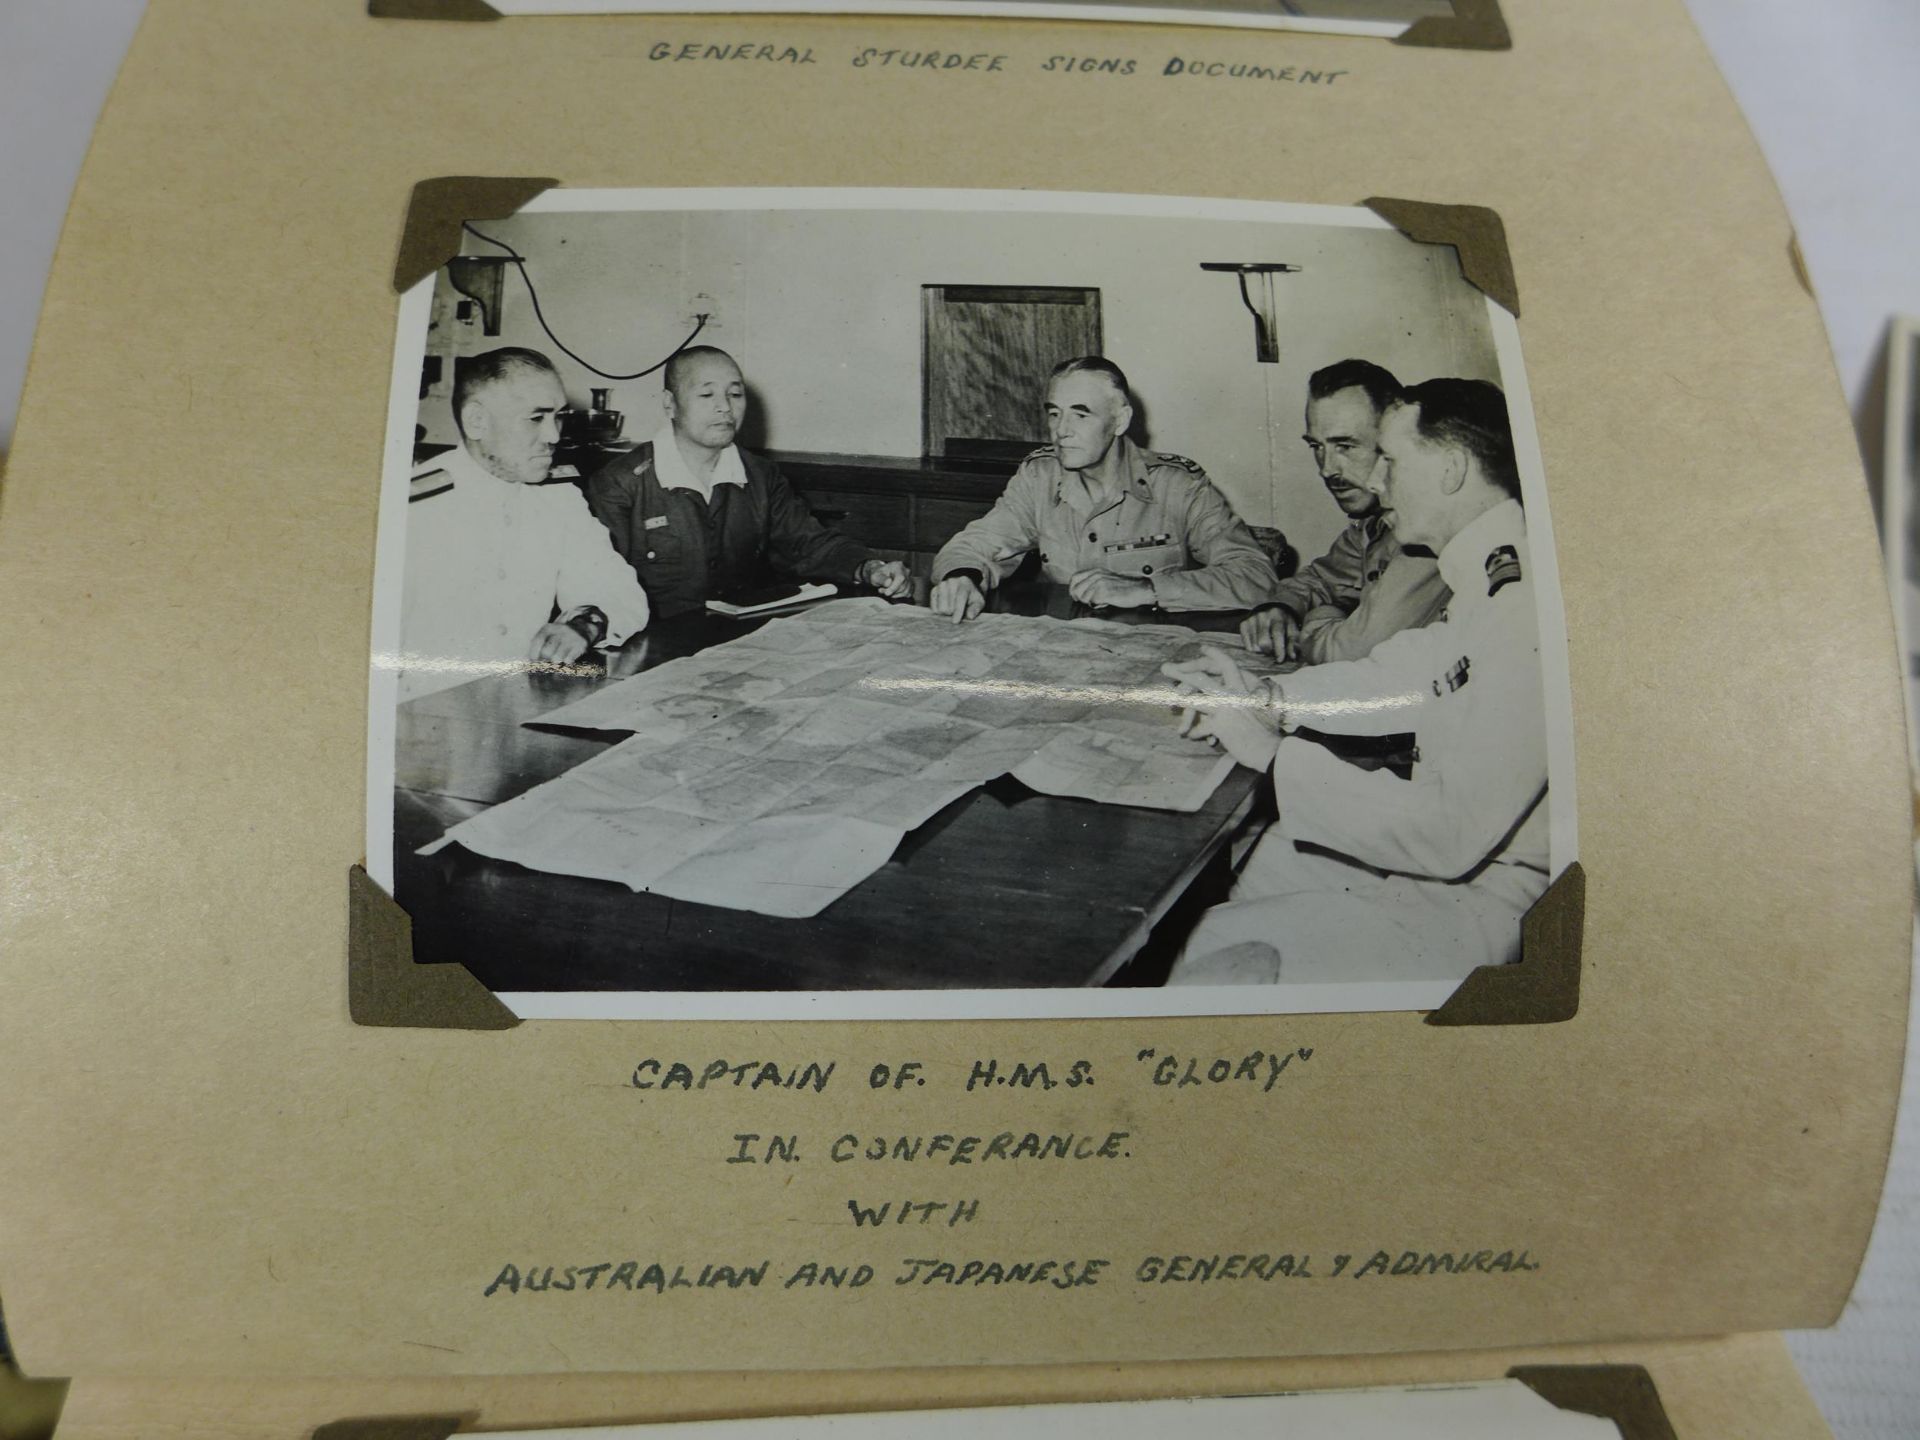 A WORLD WAR II PHOTOGRAPH ALBUM CONTAINING PHOTOGRAPHS OF THE JAPANESE SIGNING OF THE INSTRUMENT - Image 5 of 9